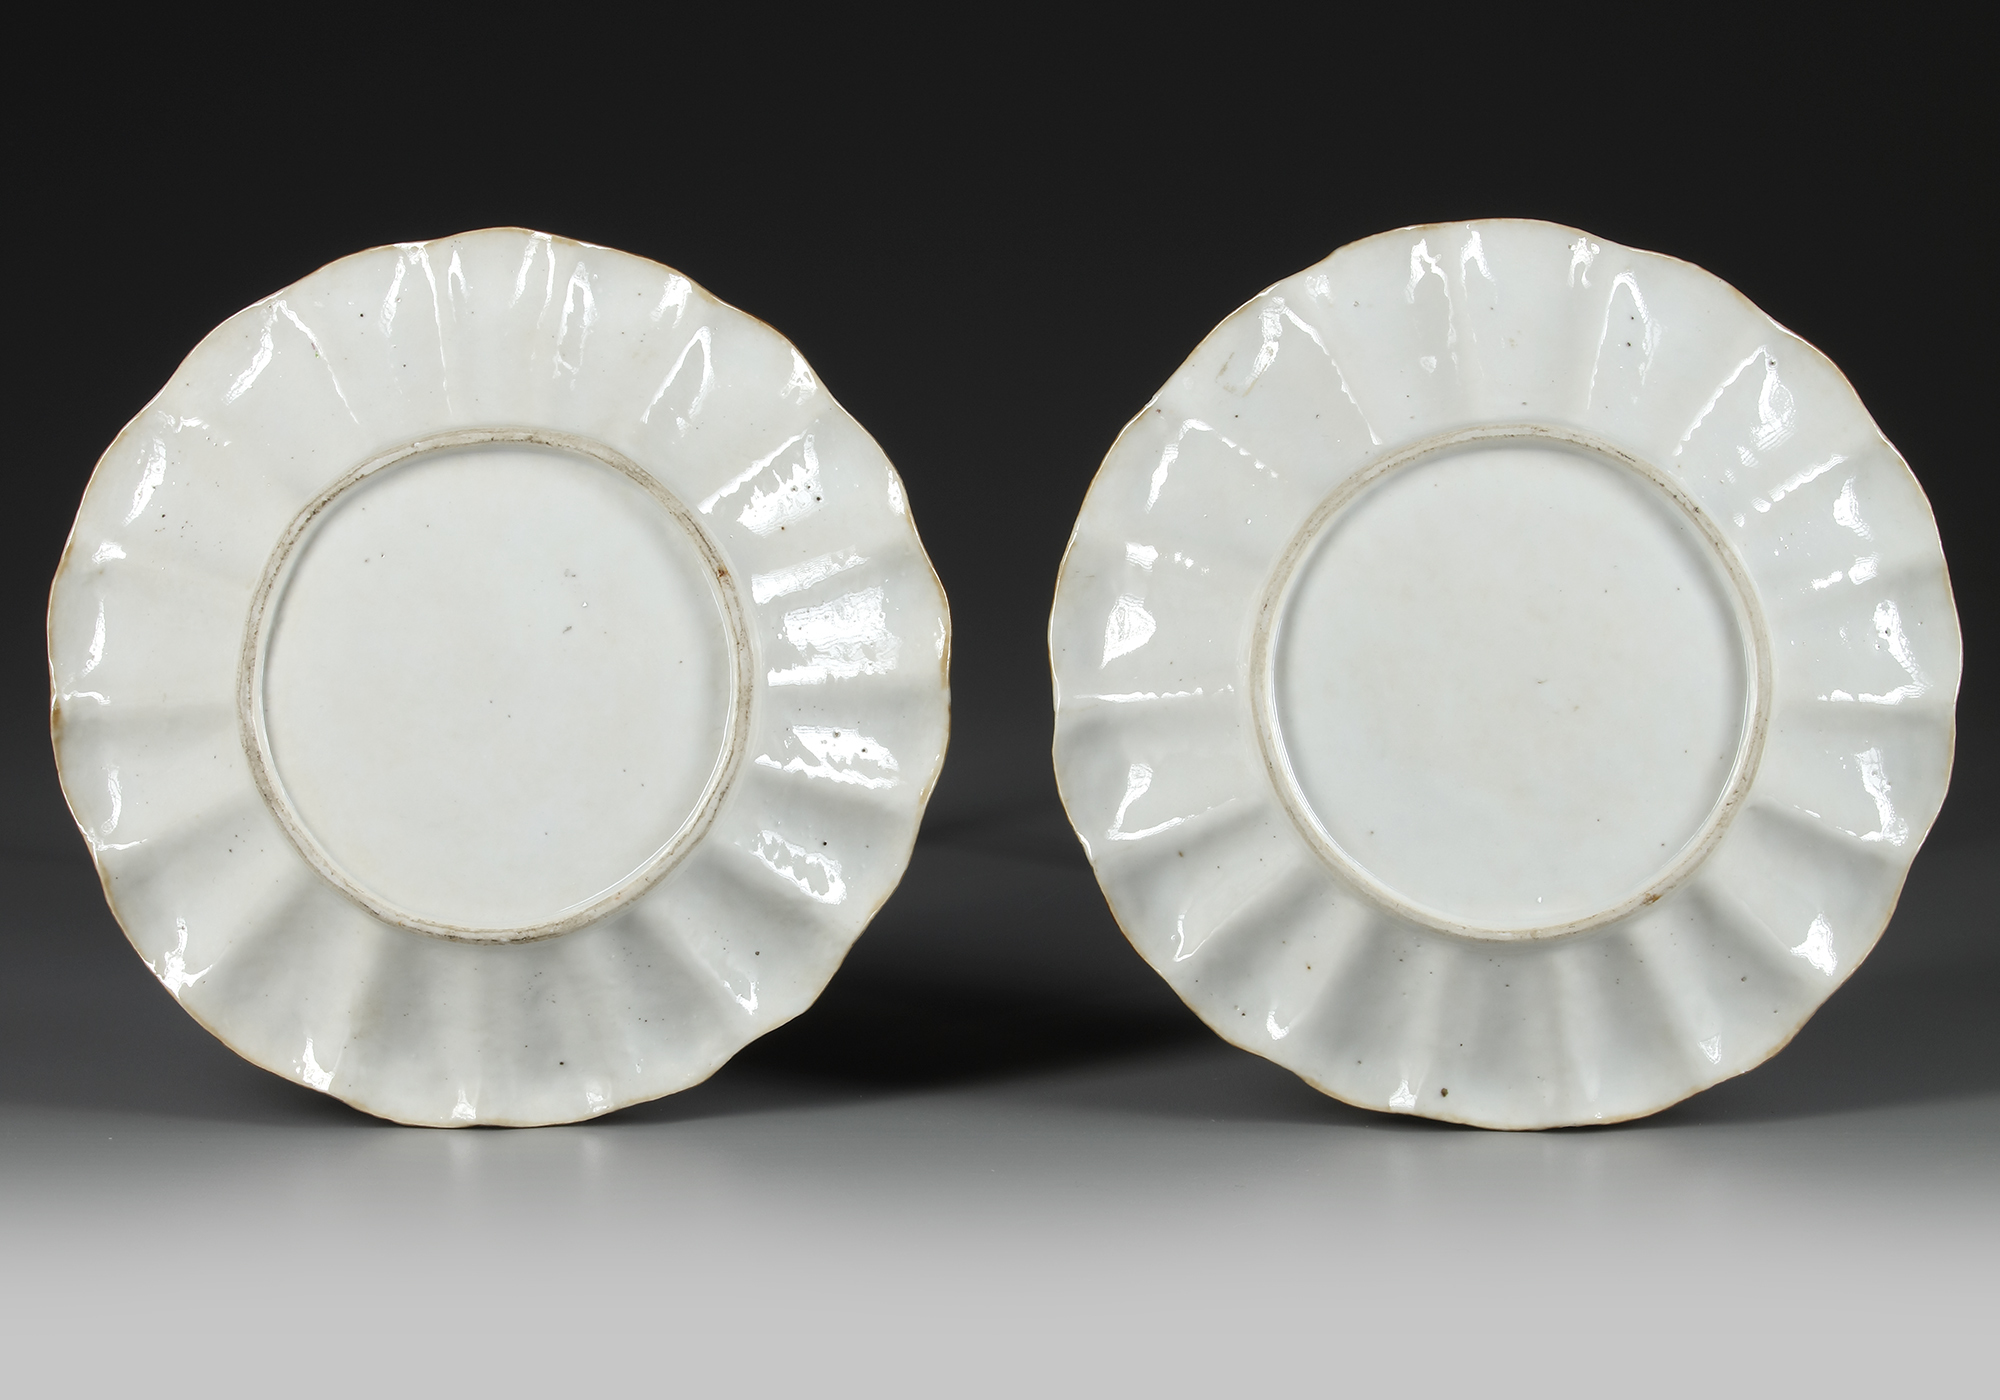 A PAIR OF CHINESE FAMILLE ROSE 'PHEASANT AND PEONY' SCALLOPED-RIM DISHES, QIANLONG PERIOD (1736-1795 - Image 2 of 2